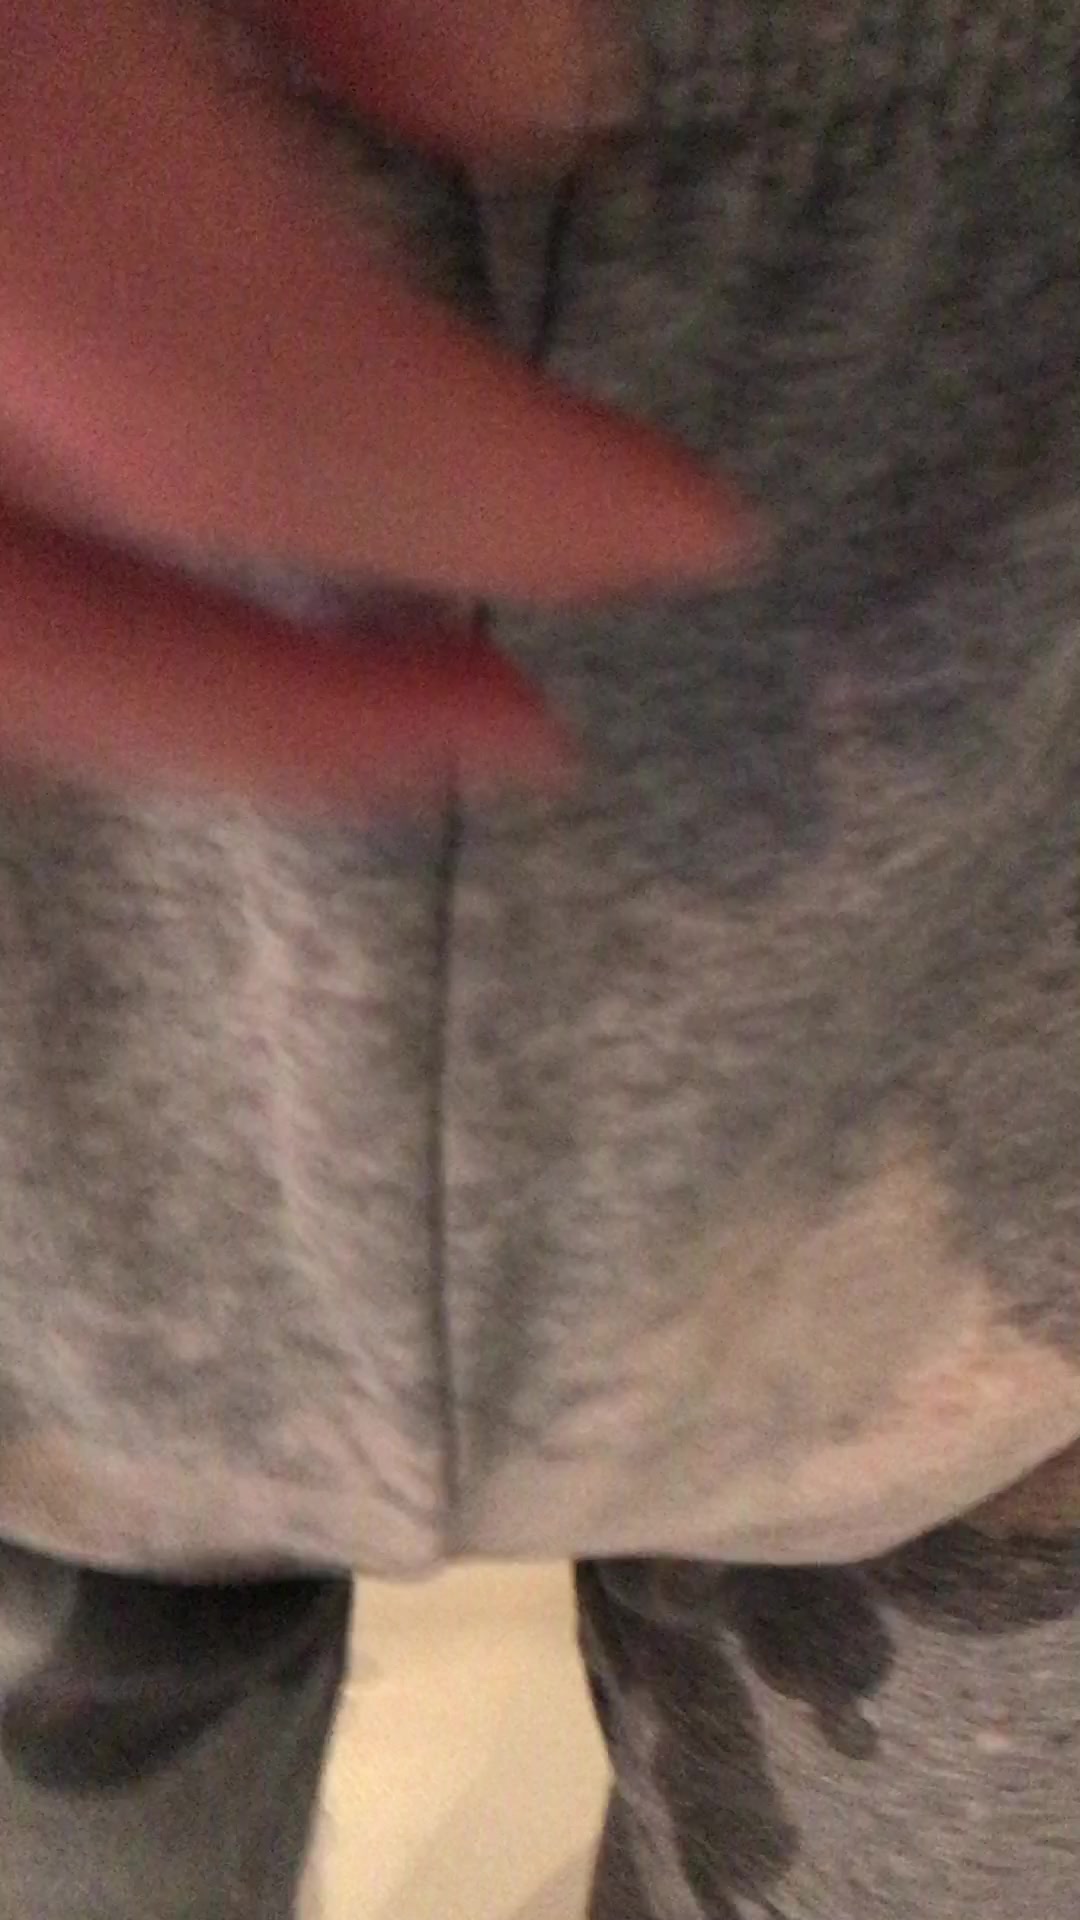 Diaper leaking in sweatpants - first time!